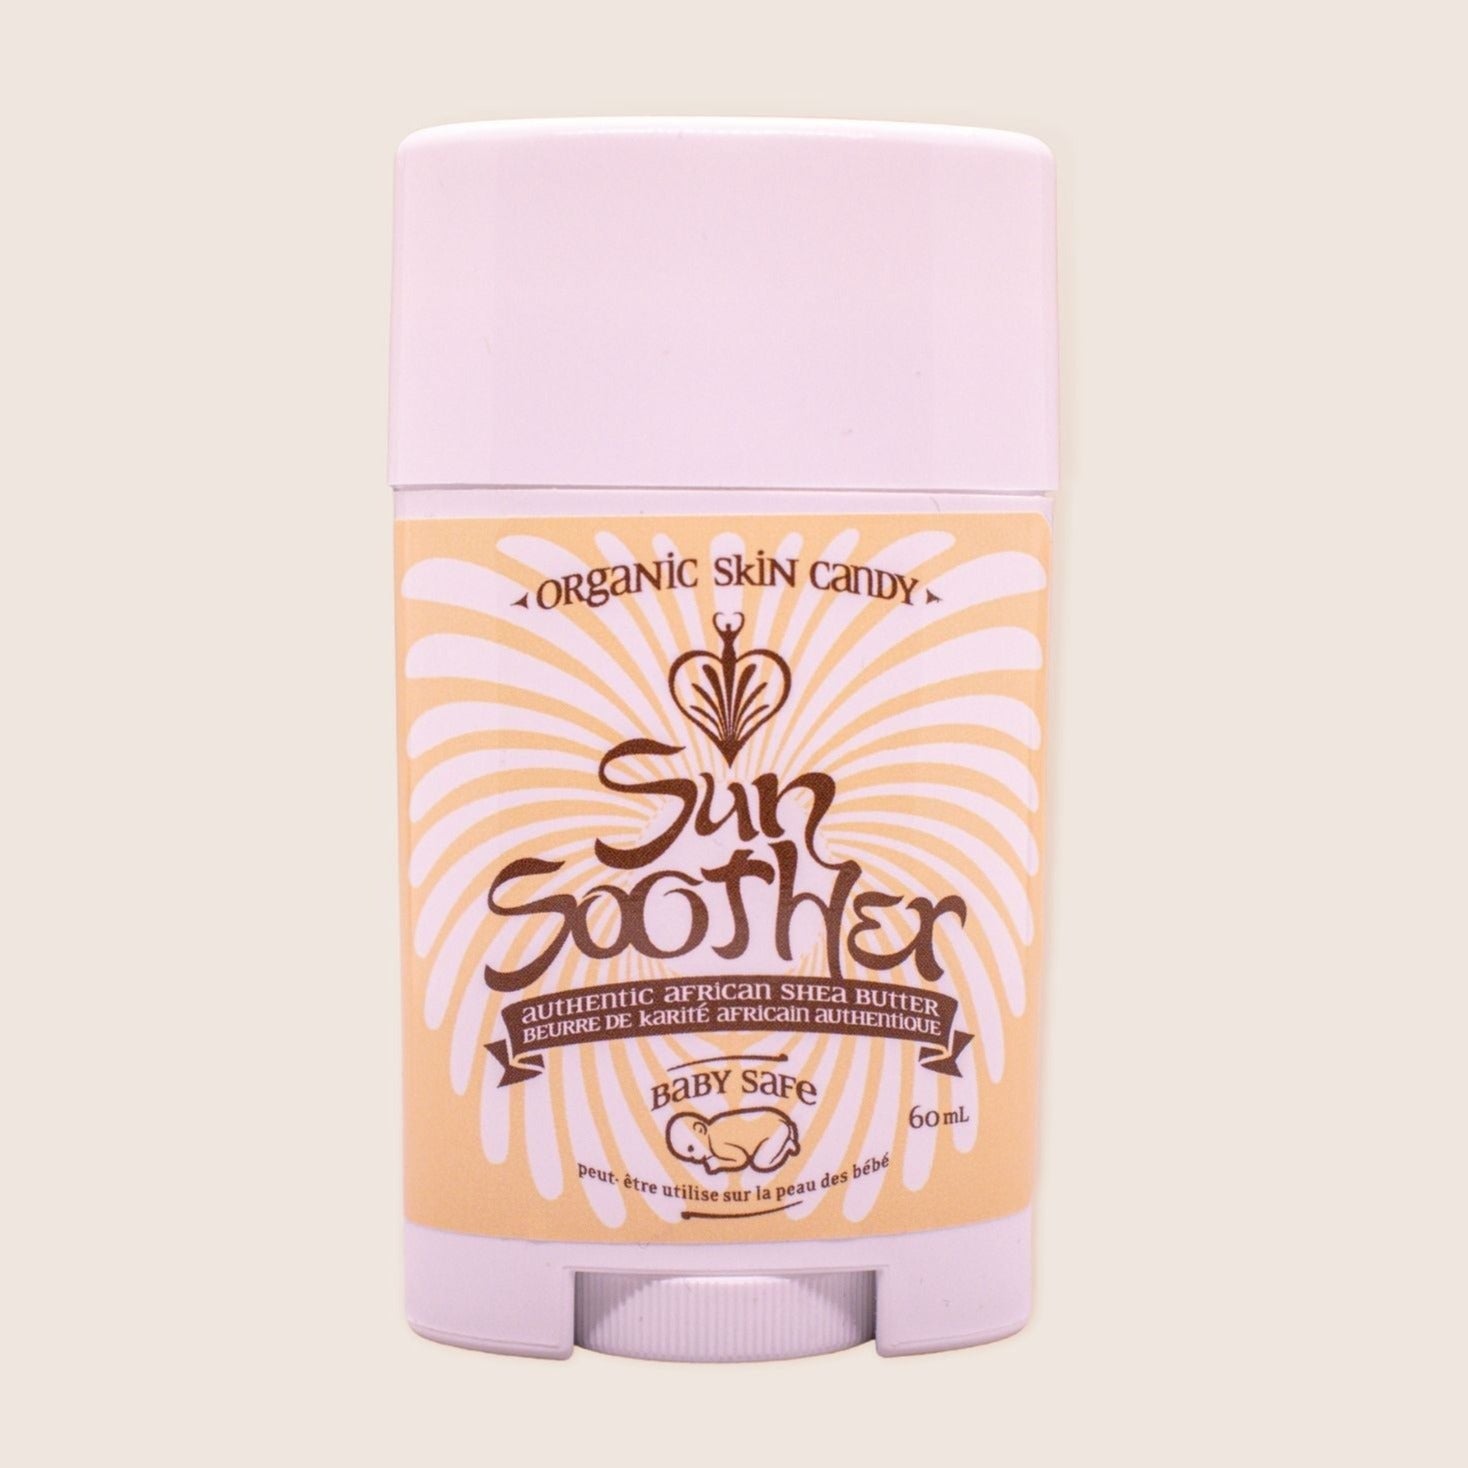 Sun Soother skin relief by Shea Butter Market